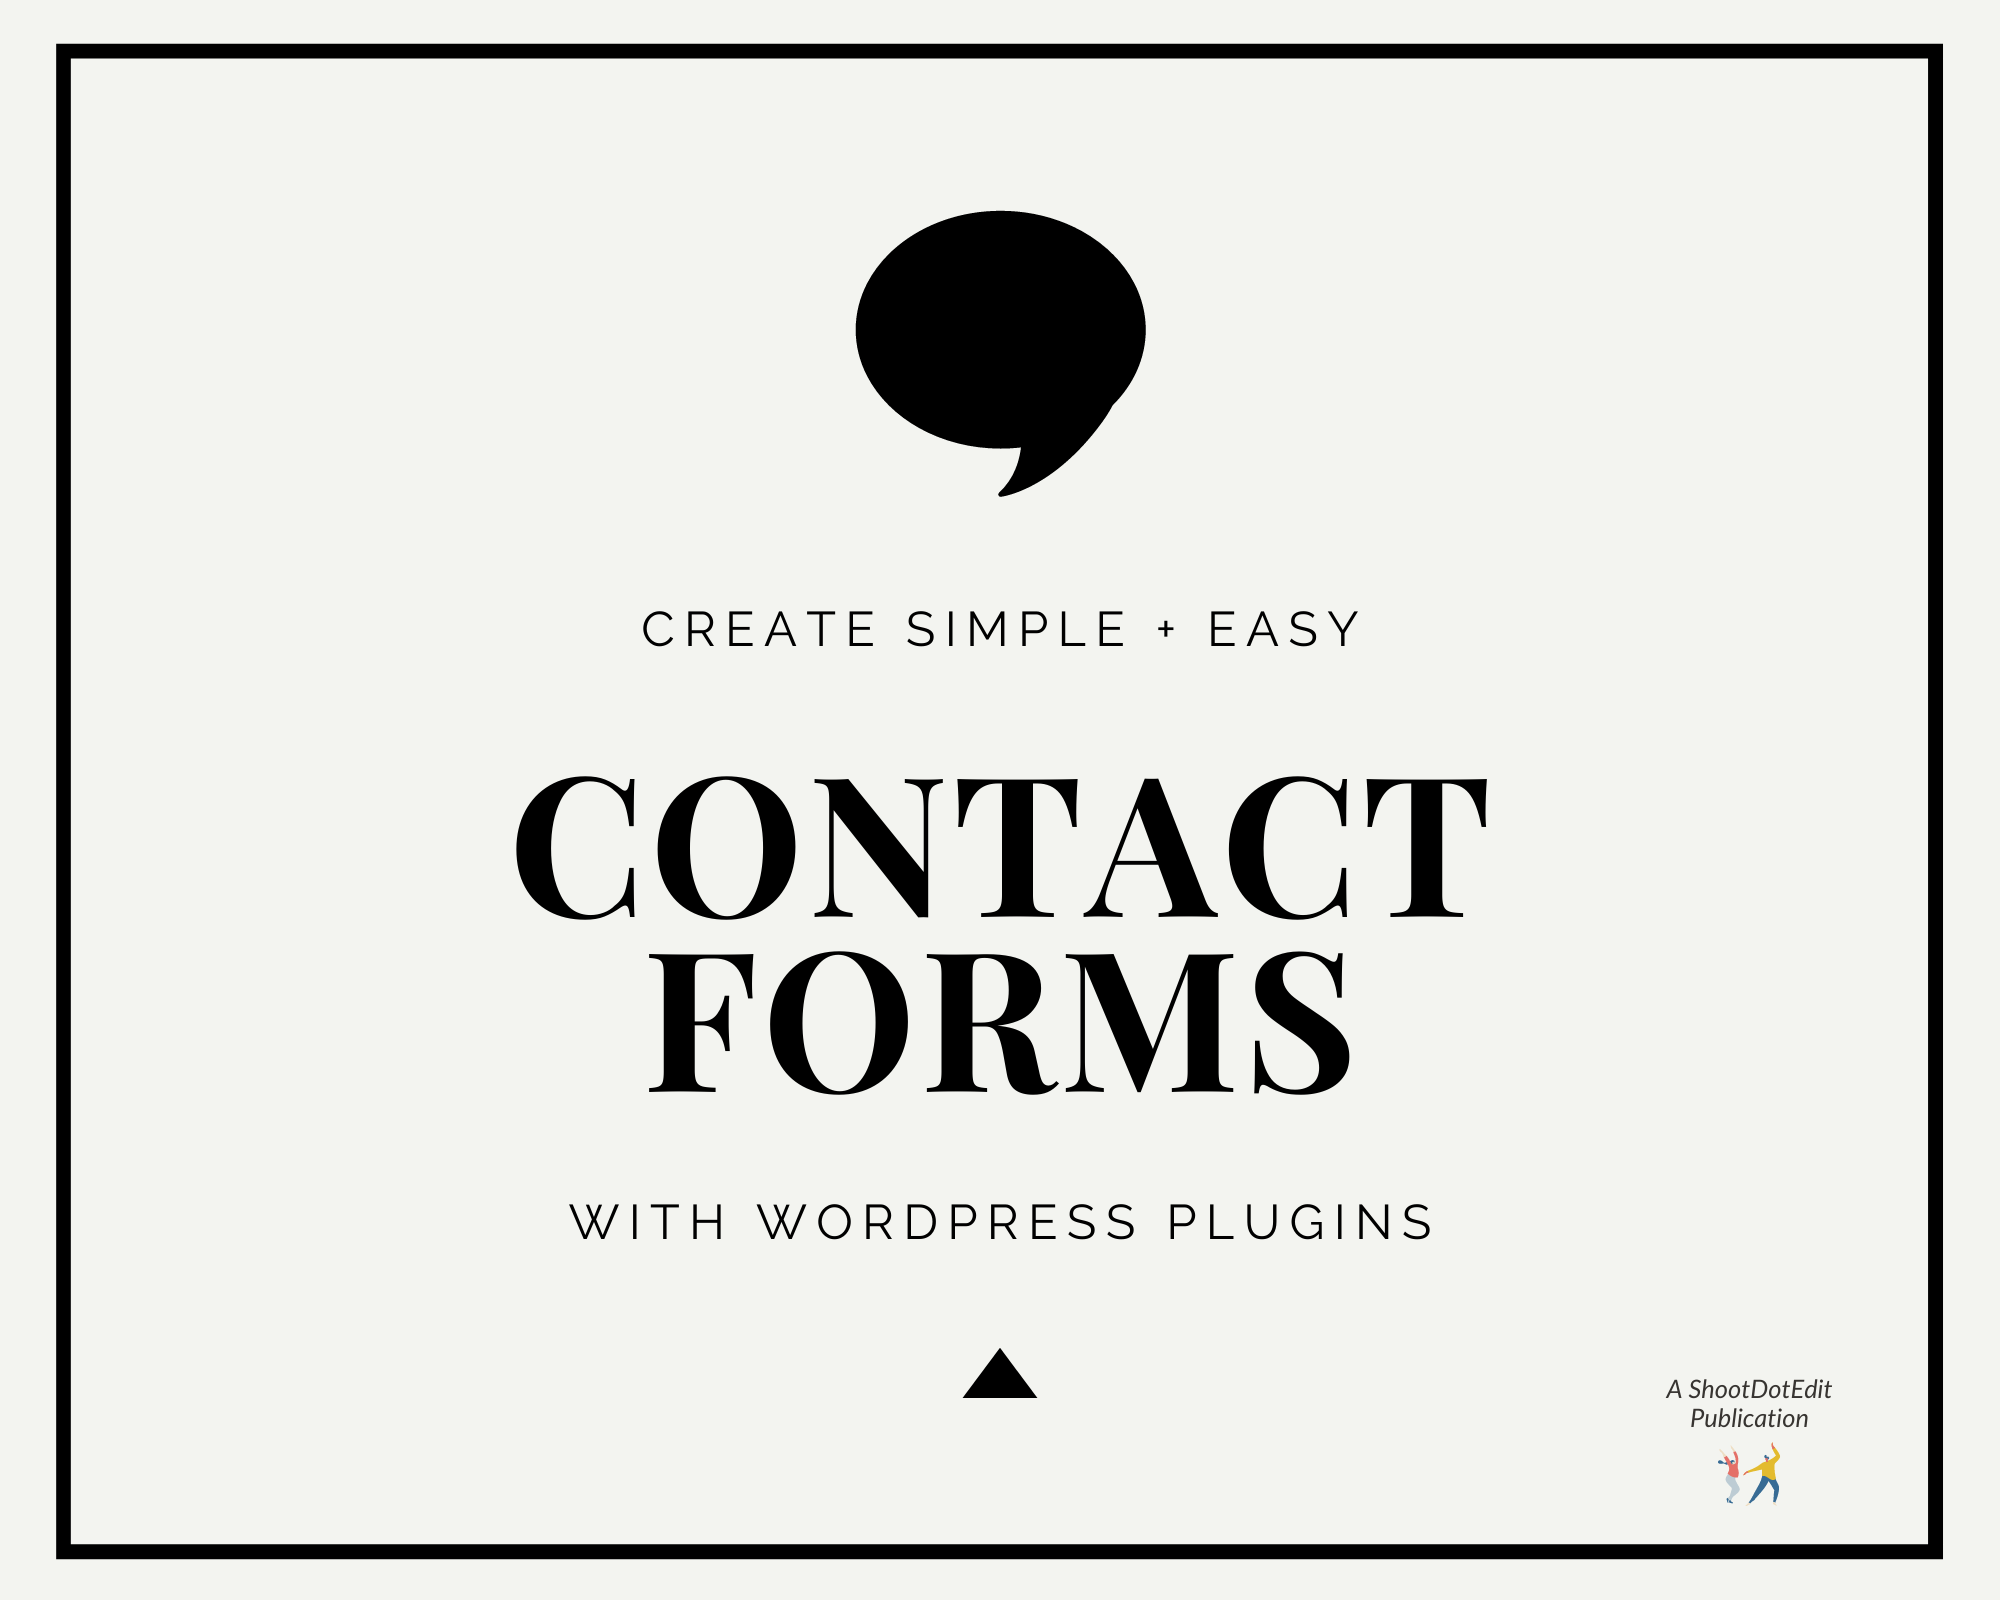 Create simple and easy contact forms with WordPress plugins